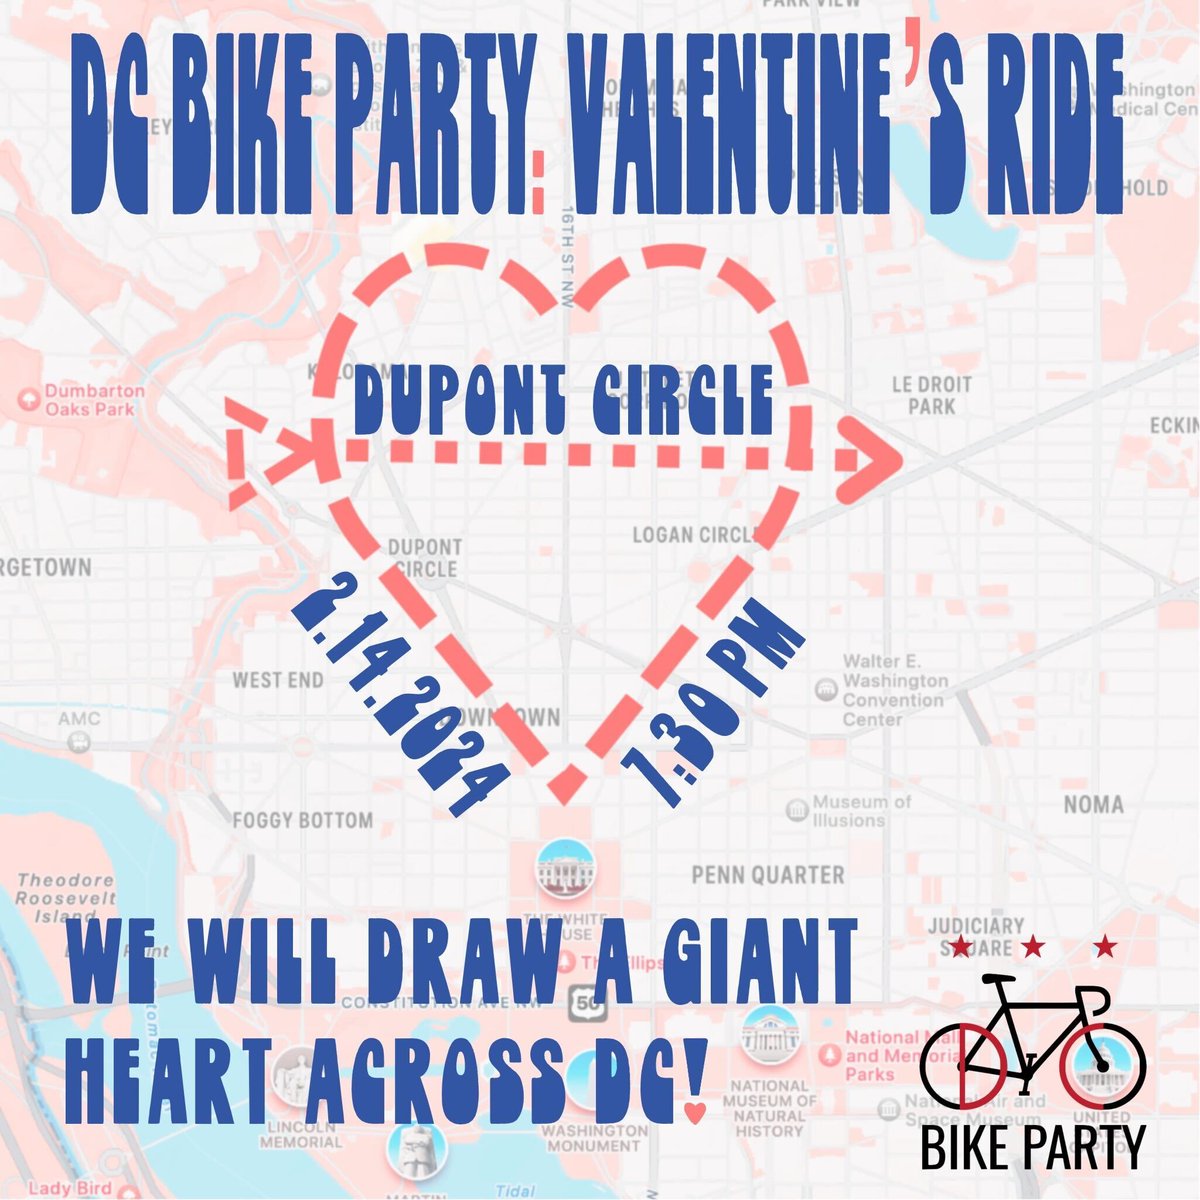 On Valentine’s day, join DCBikeParty as we draw a 💜 across the city! Strava-art with 💜! Bring ur valentine to (or try to find one @) Dupont Circle Wed 2/14 @ 730p Wheels up @ 8 Pls consider supporting our Feb charity partner @ linktree in bio. More: facebook.com/events/s/dc-bi…